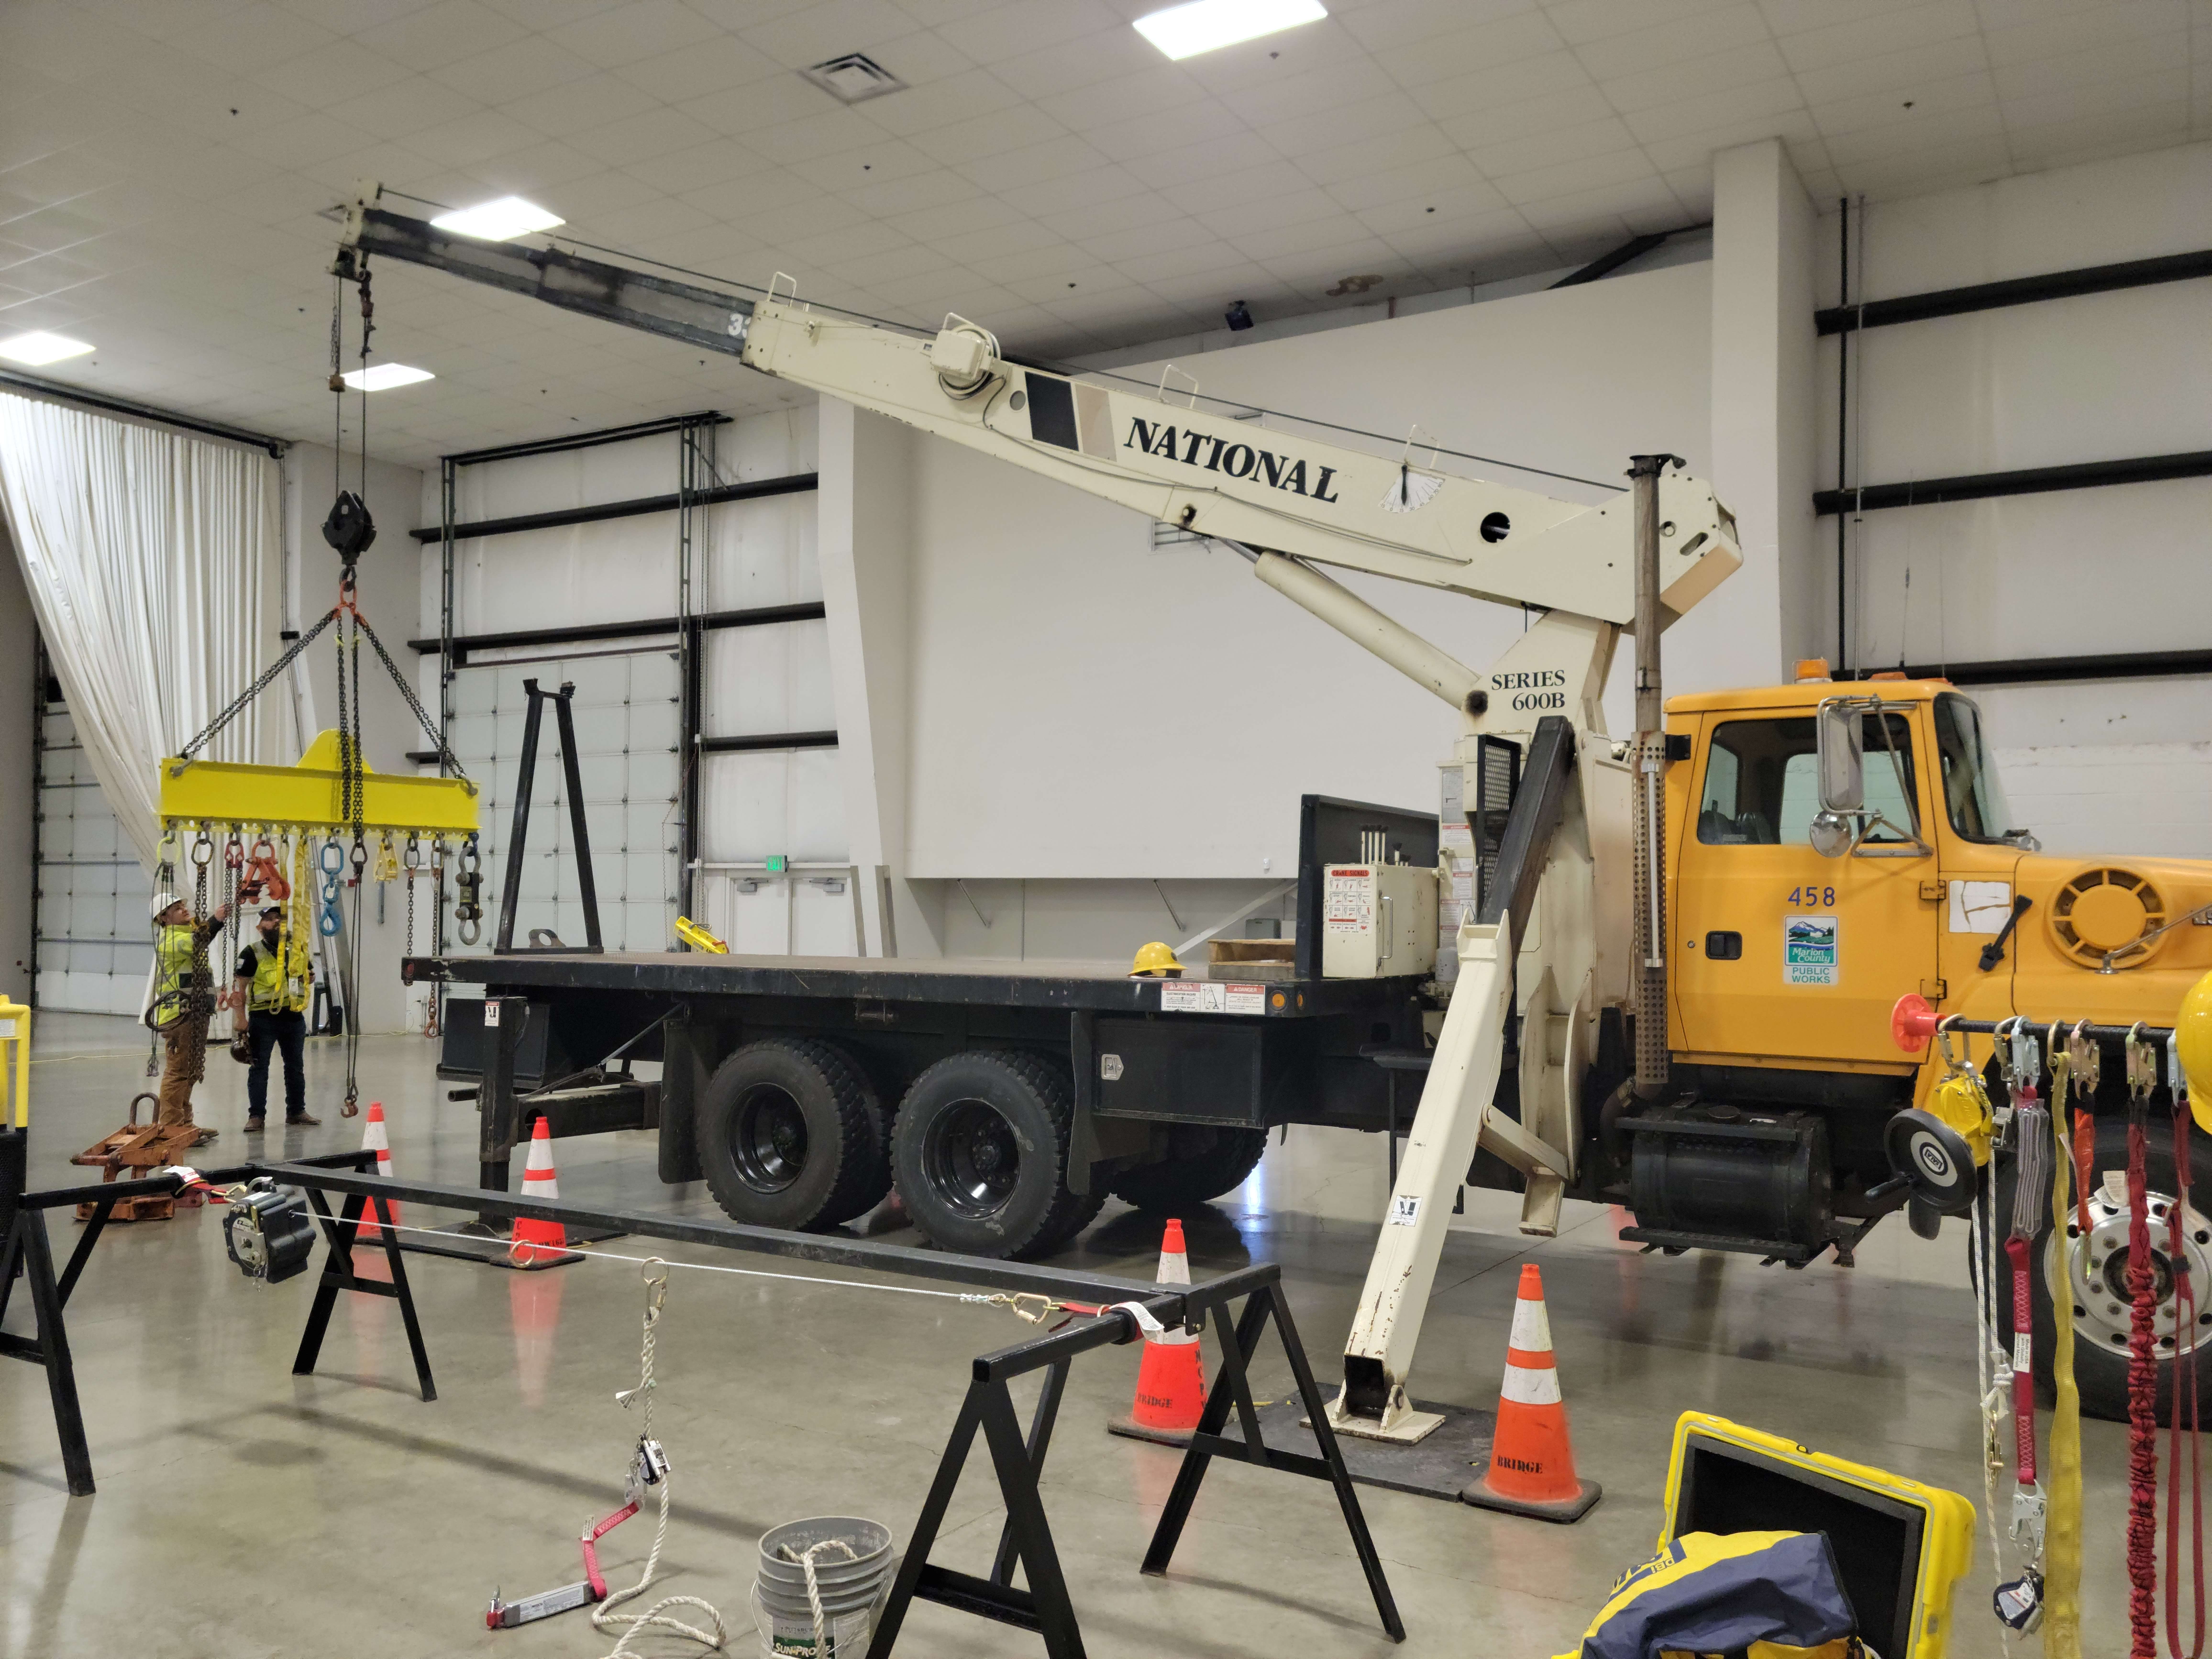 Crane Rigging Demonstrtion from Marion County aat OAsces Bridge Conference